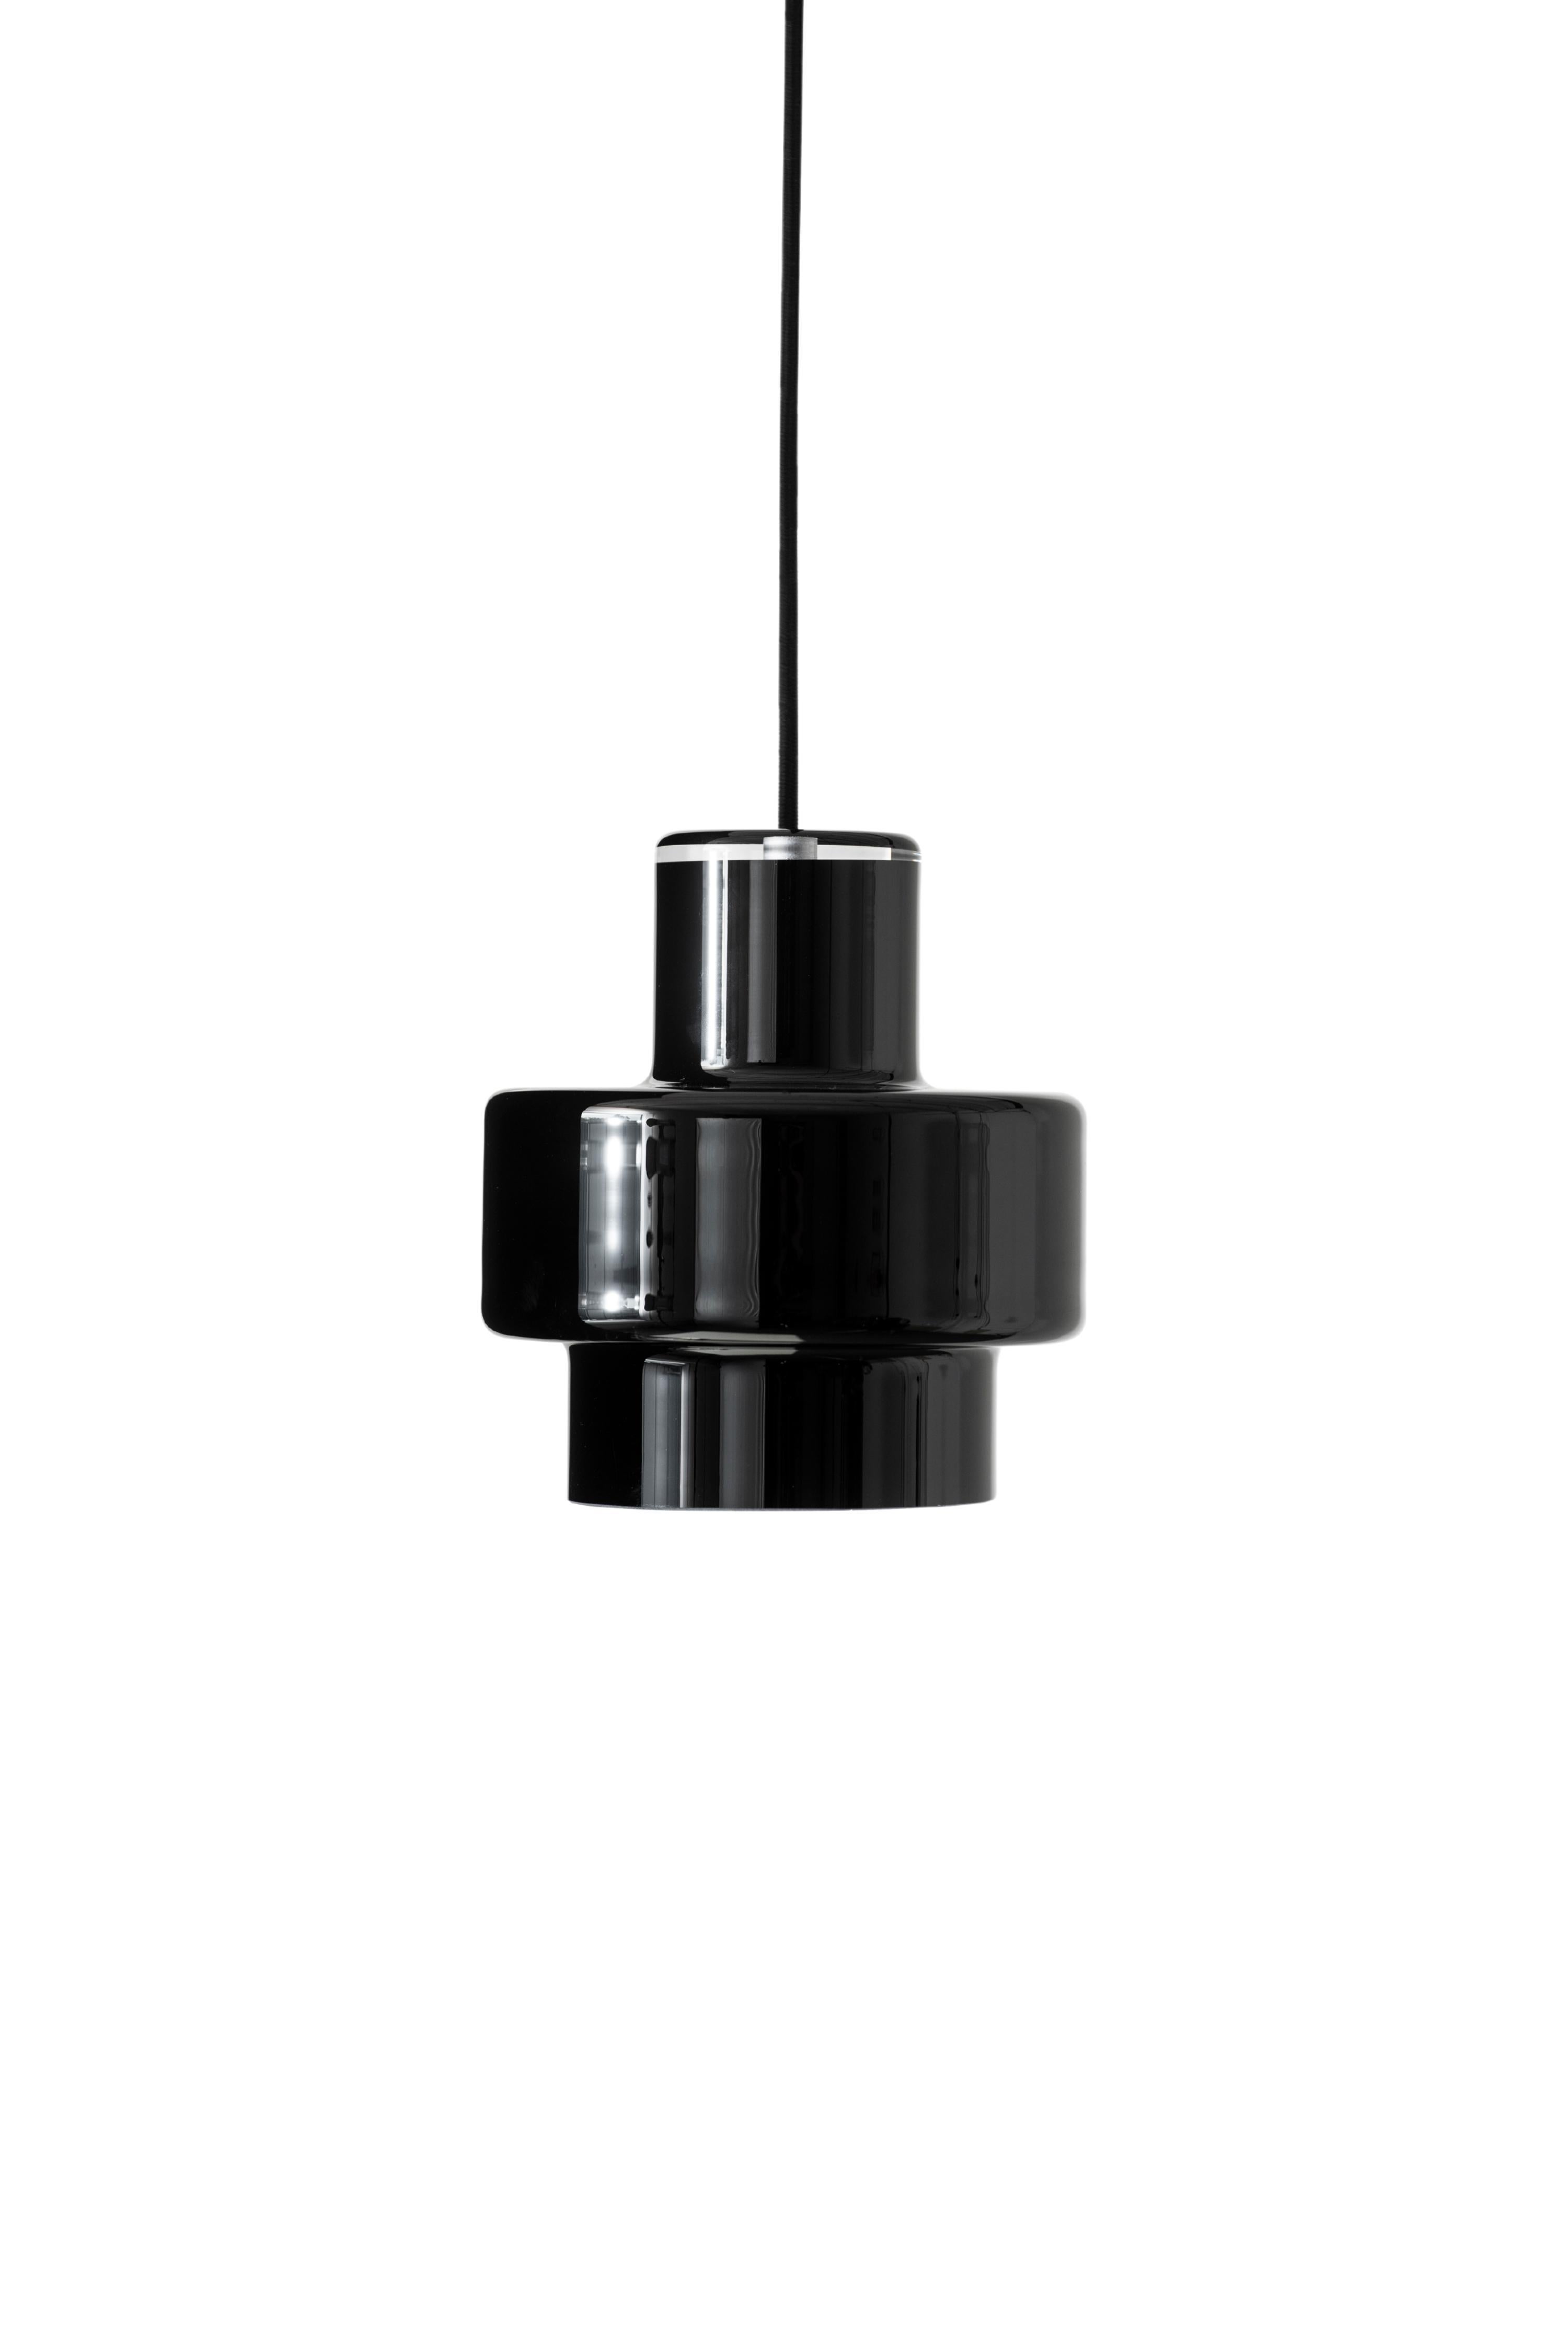 Contemporary Pair of 'Multi S' Glass Pendants in Black by Jokinen and Konu for Innolux For Sale